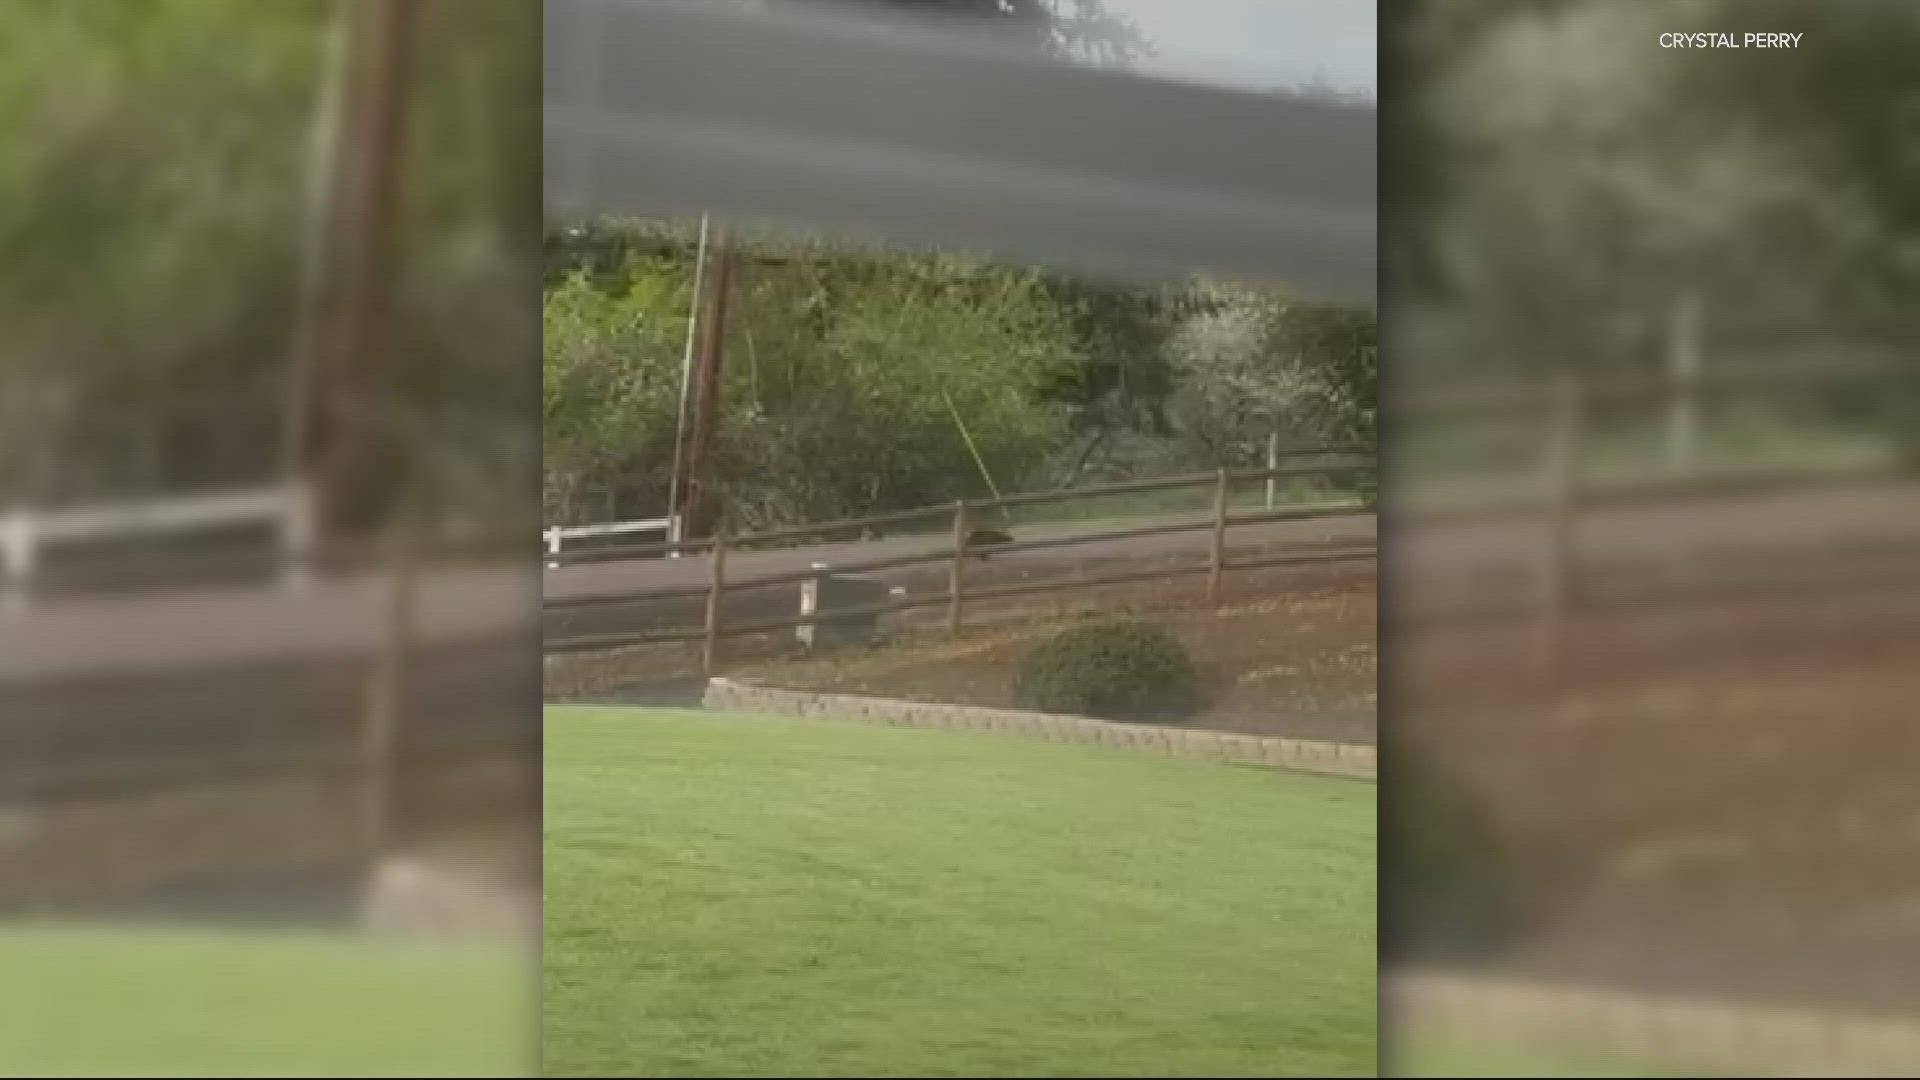 A KGW viewer captured a wolverine trying to get her yard near Hidden Valley Road in Lebanon.